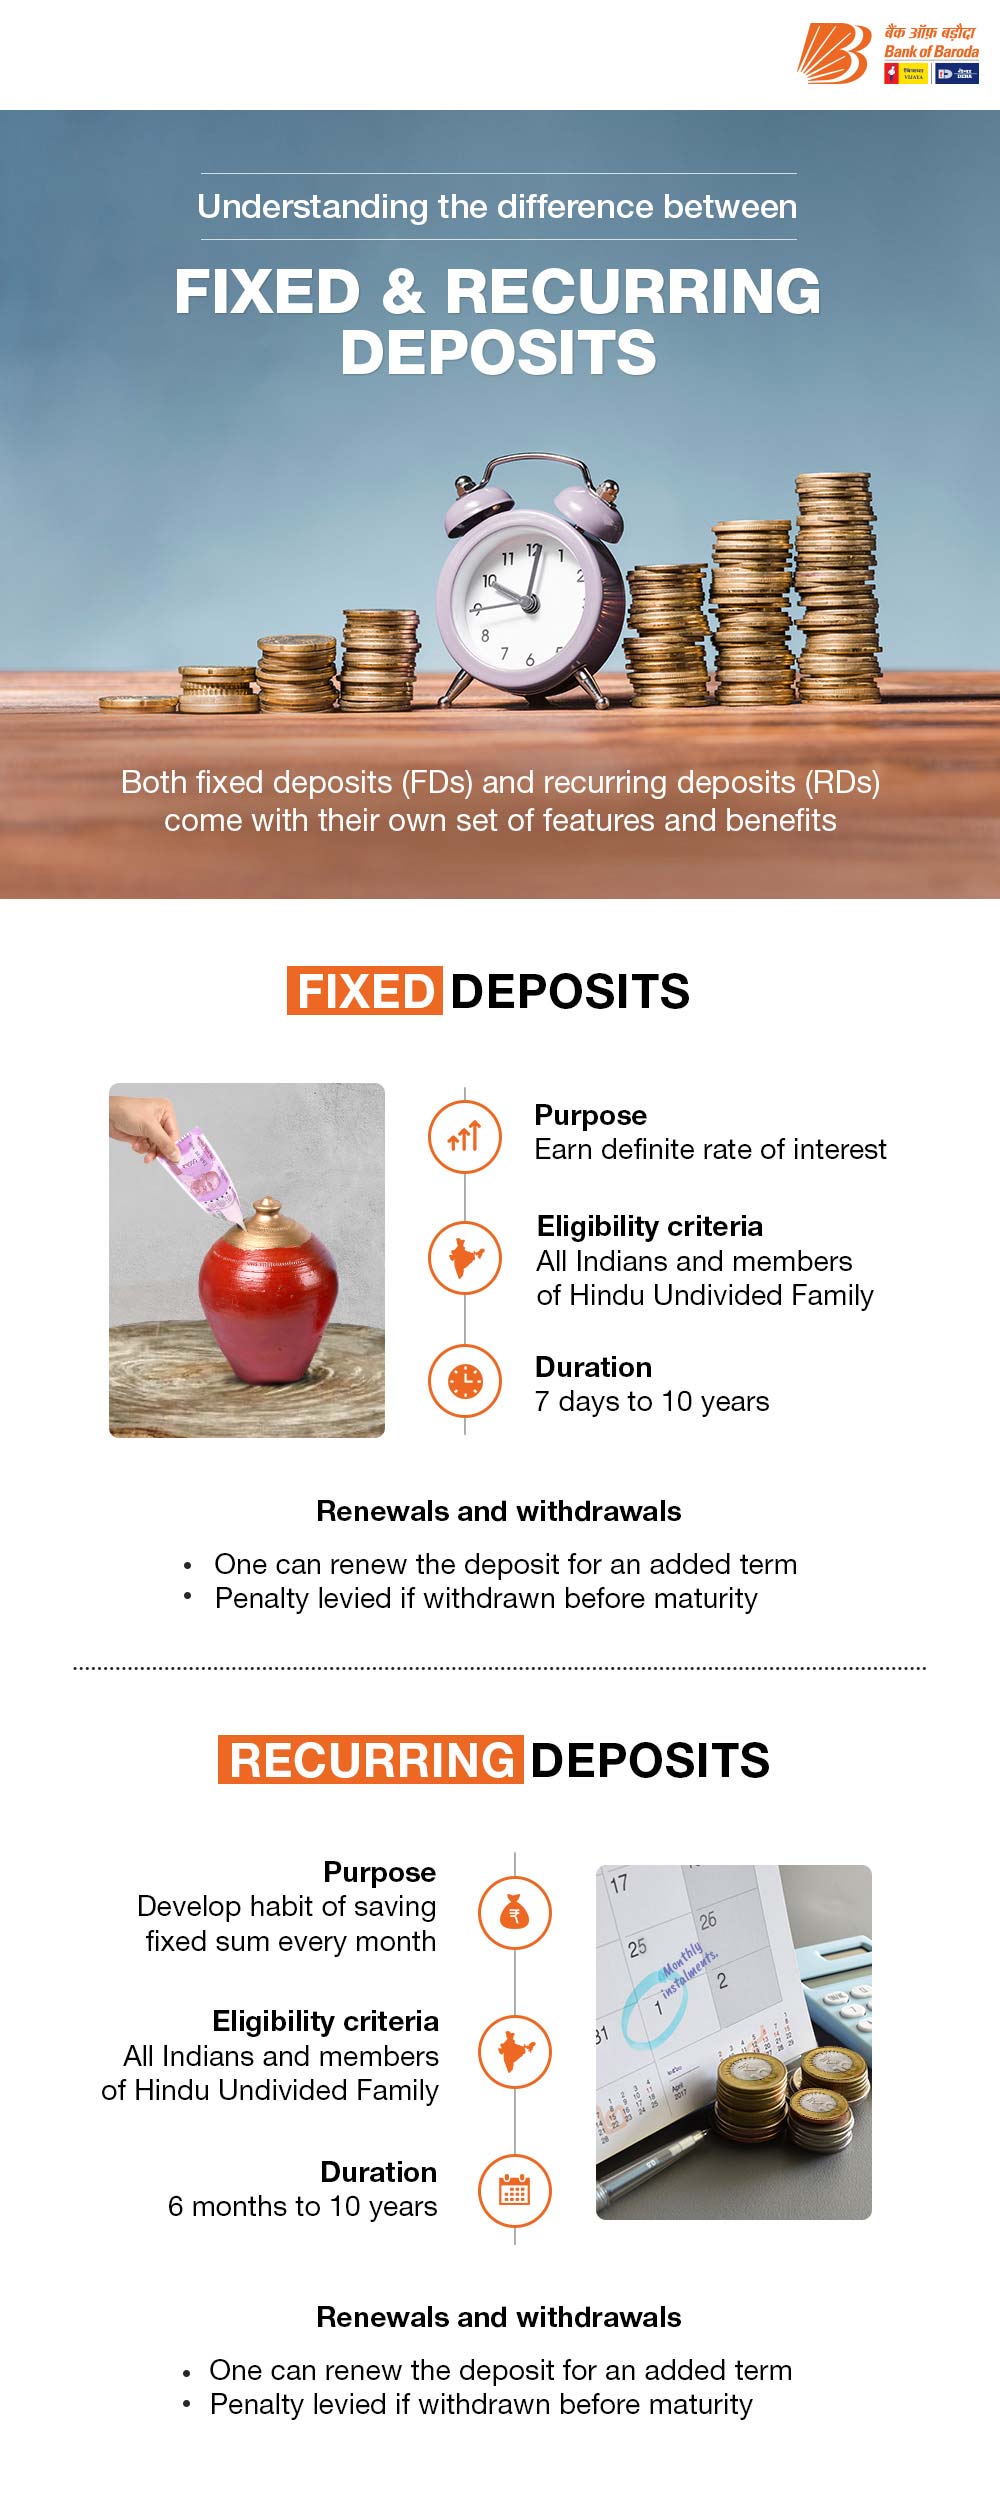 Fixed & Recurring Deposits